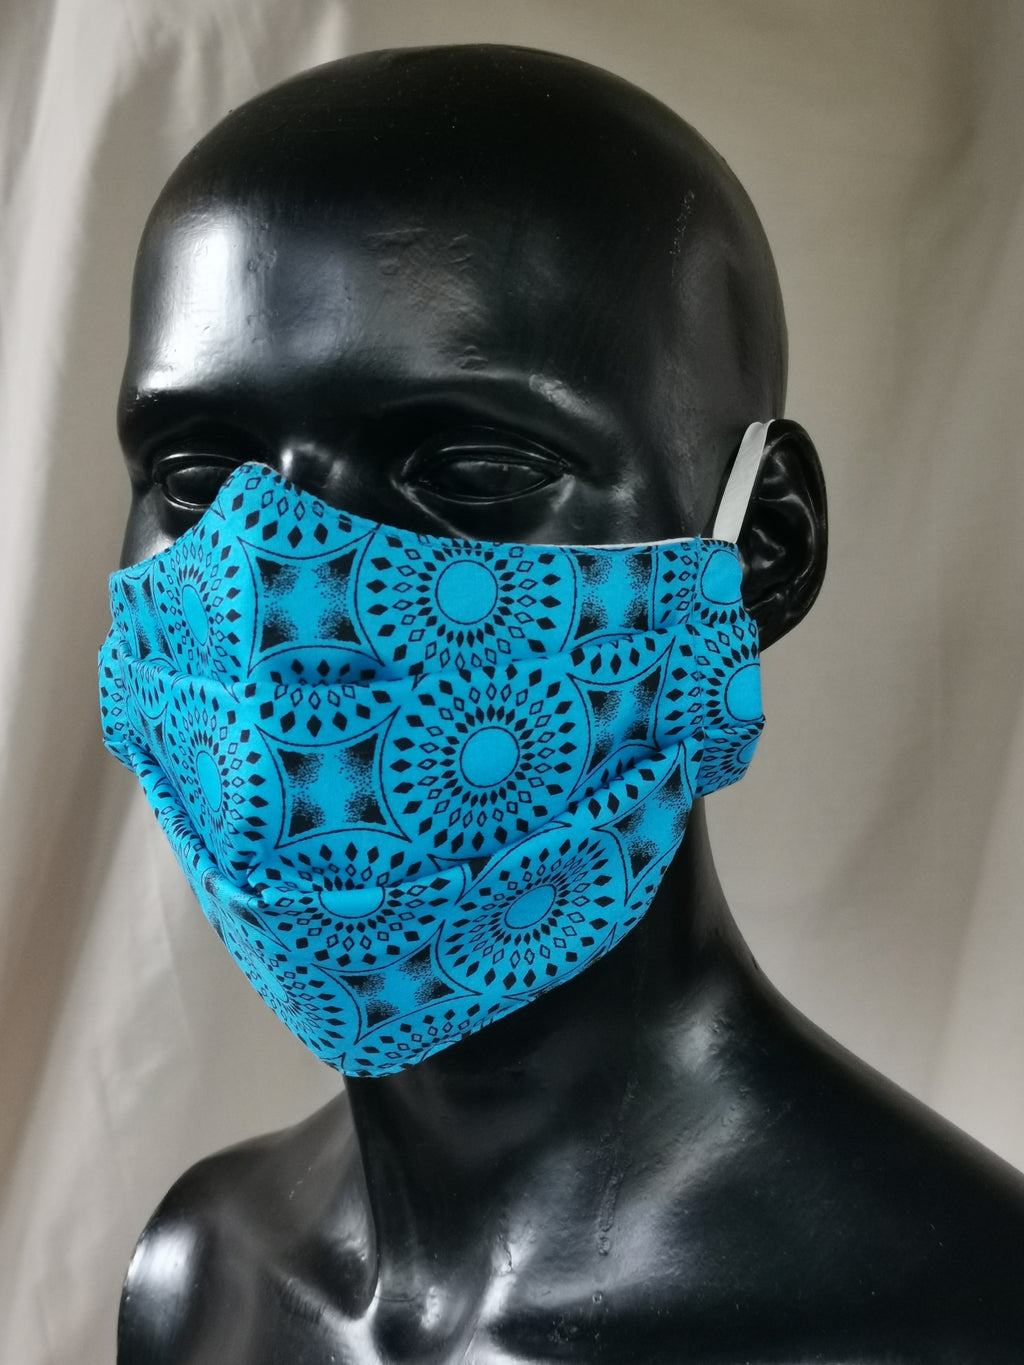 402 TYPE 1 Face mask - New Turk, Kids(S) and Adult Med